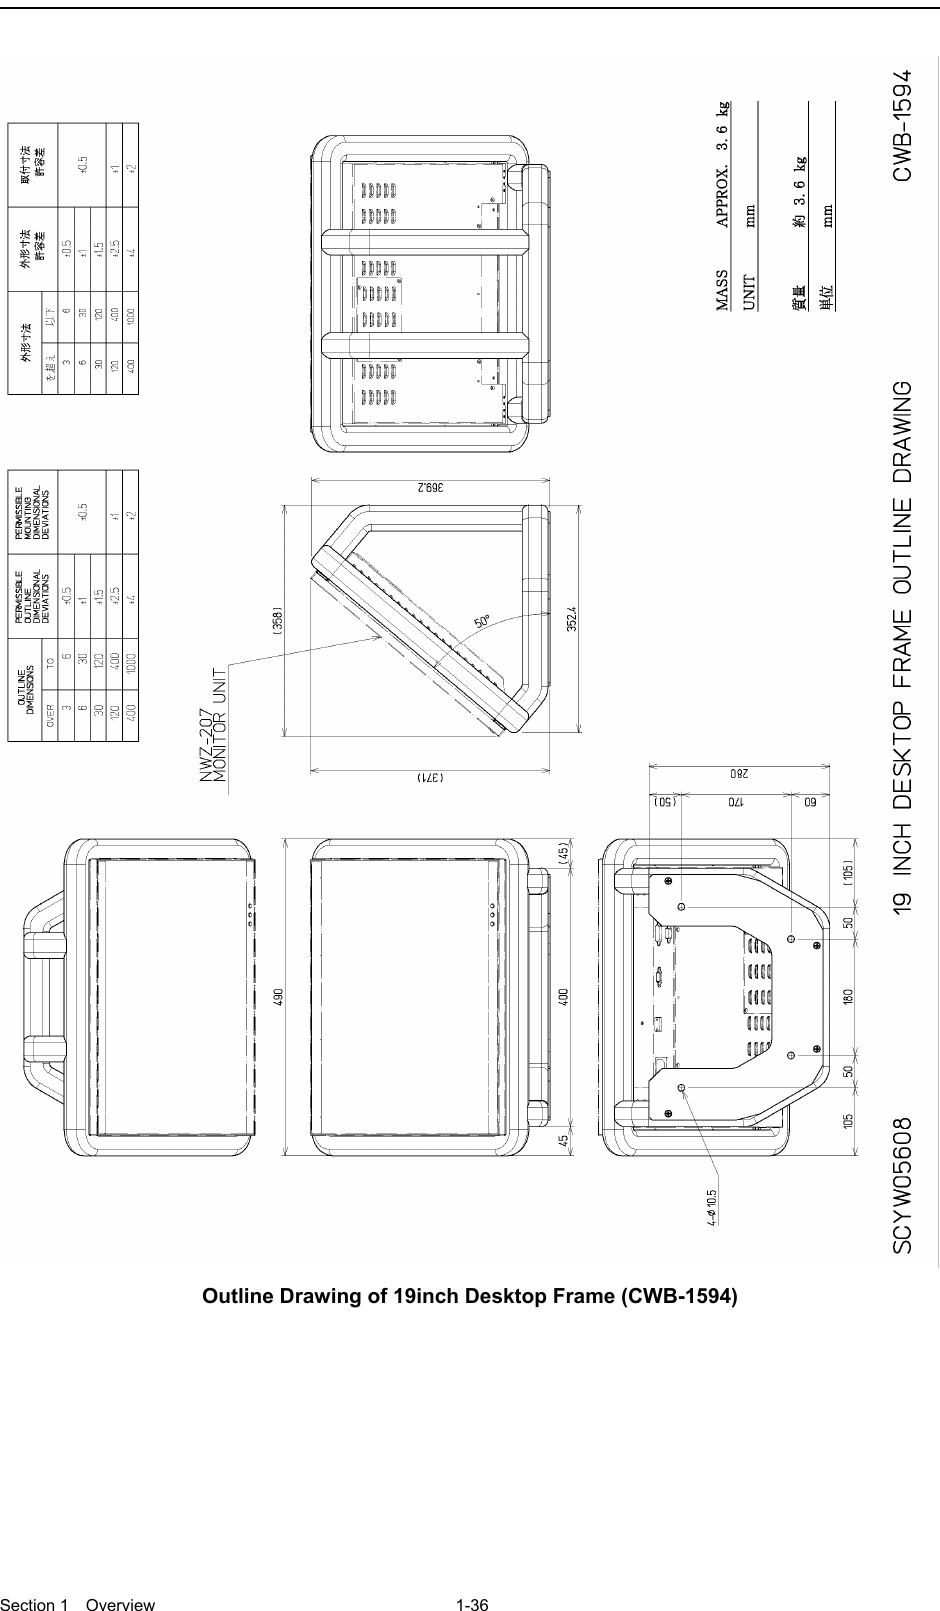  Section 1  Overview 1-36   Outline Drawing of 19inch Desktop Frame (CWB-1594)  